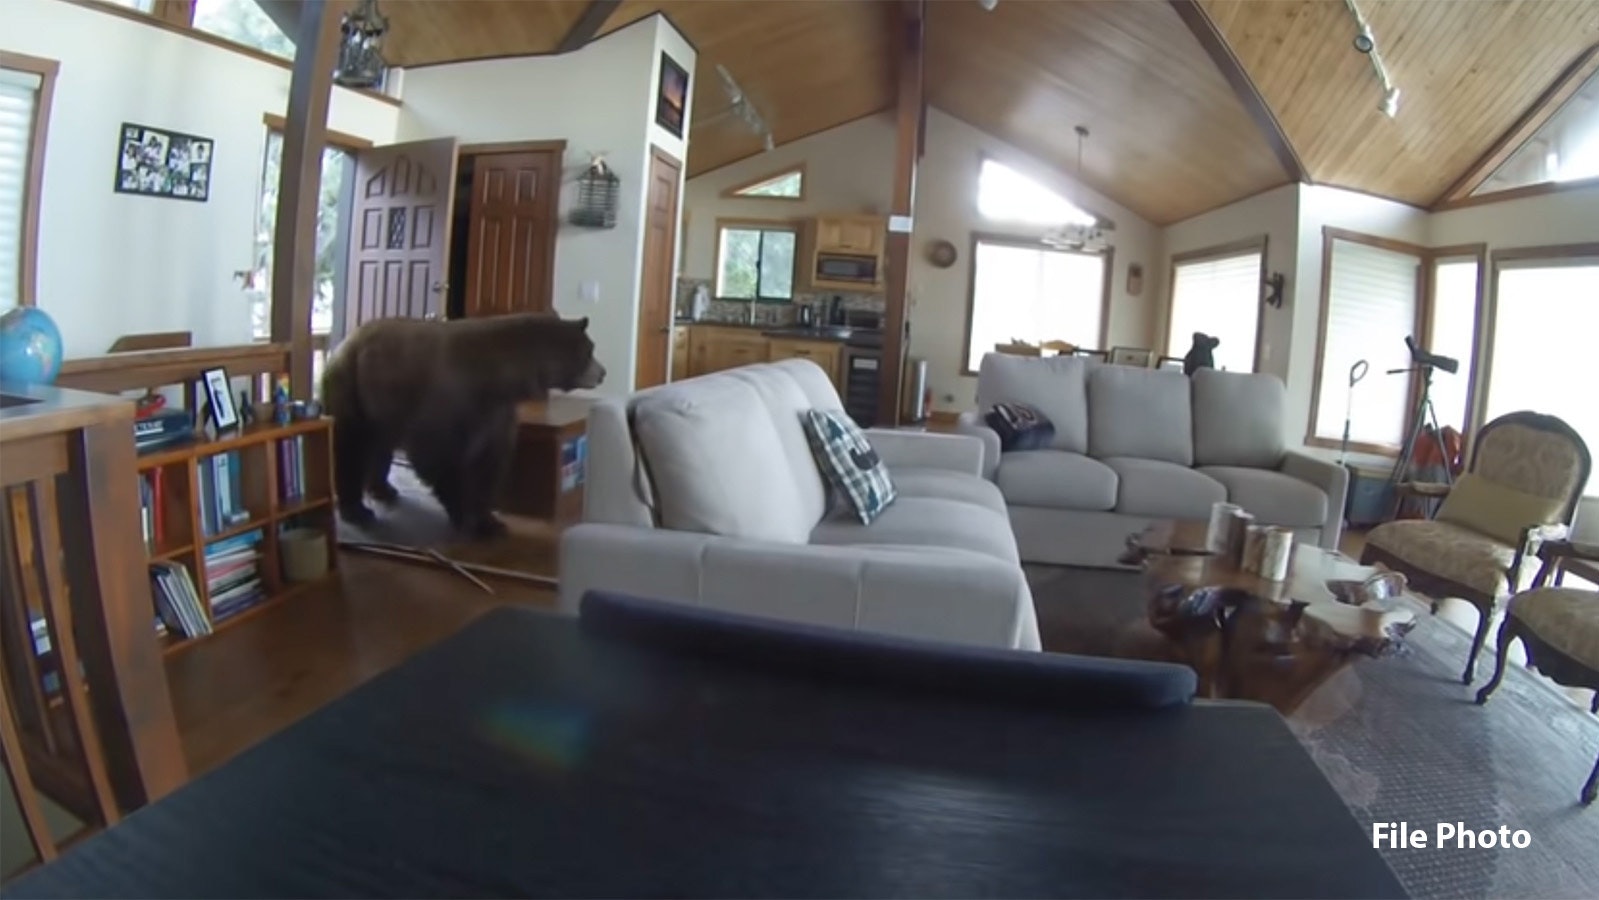 It's unusual, but not unheard of, for bears to break into homes while looking for food, as in this file photo from a video of a bear break-in a few years ago.